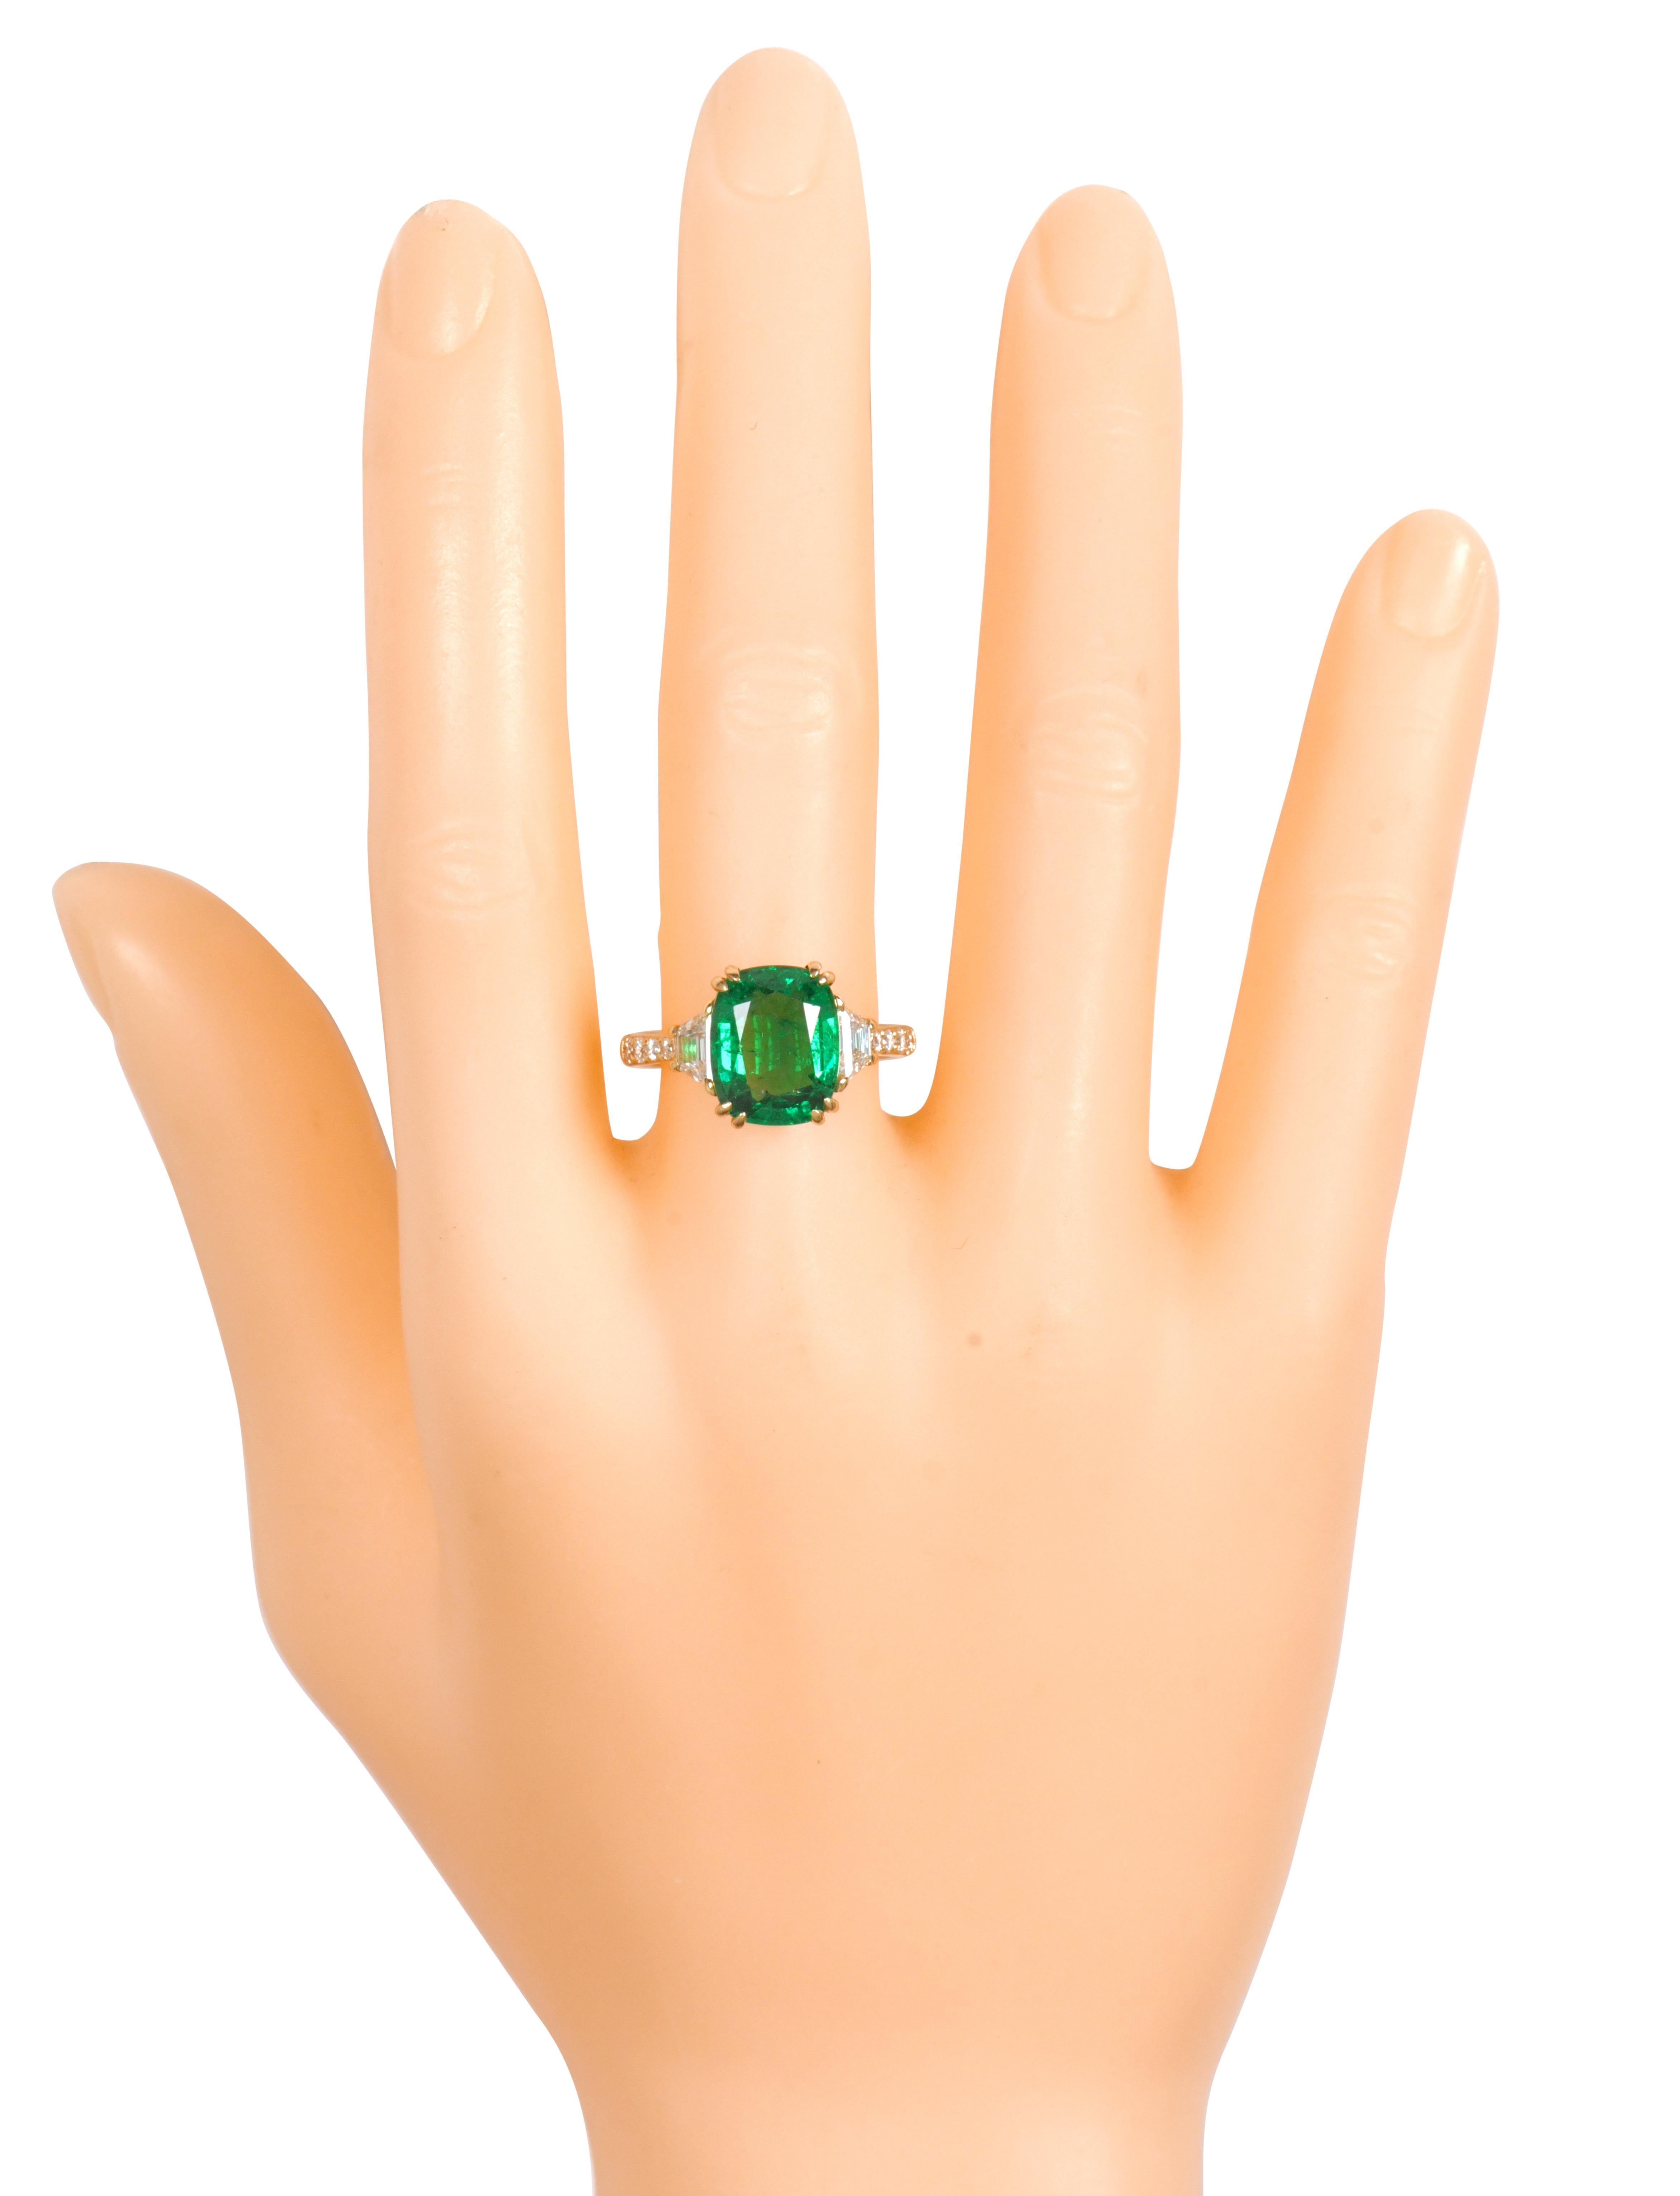 18 Karat Yellow Gold 5.06 Carat Natural Emerald and Diamond Solitaire Ring

This glorious trinity vivid green emerald and diamond ring is marvelous. The three-stone trinity ring tells a story by not only representing the said “past, present, and